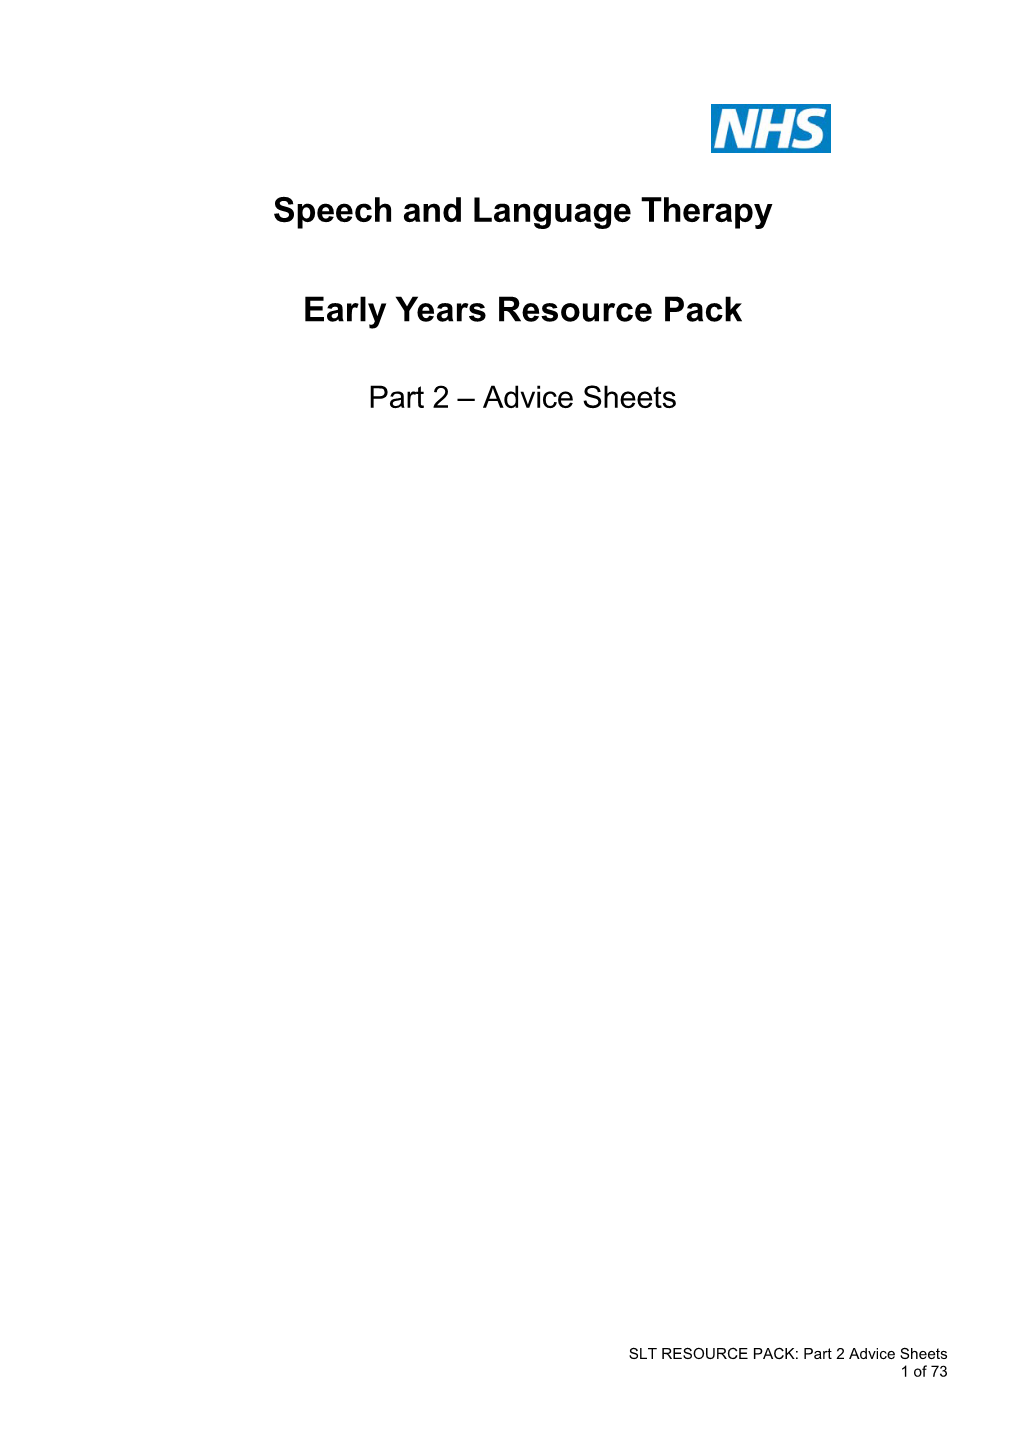 Speech & Language Therapy Resource Pack